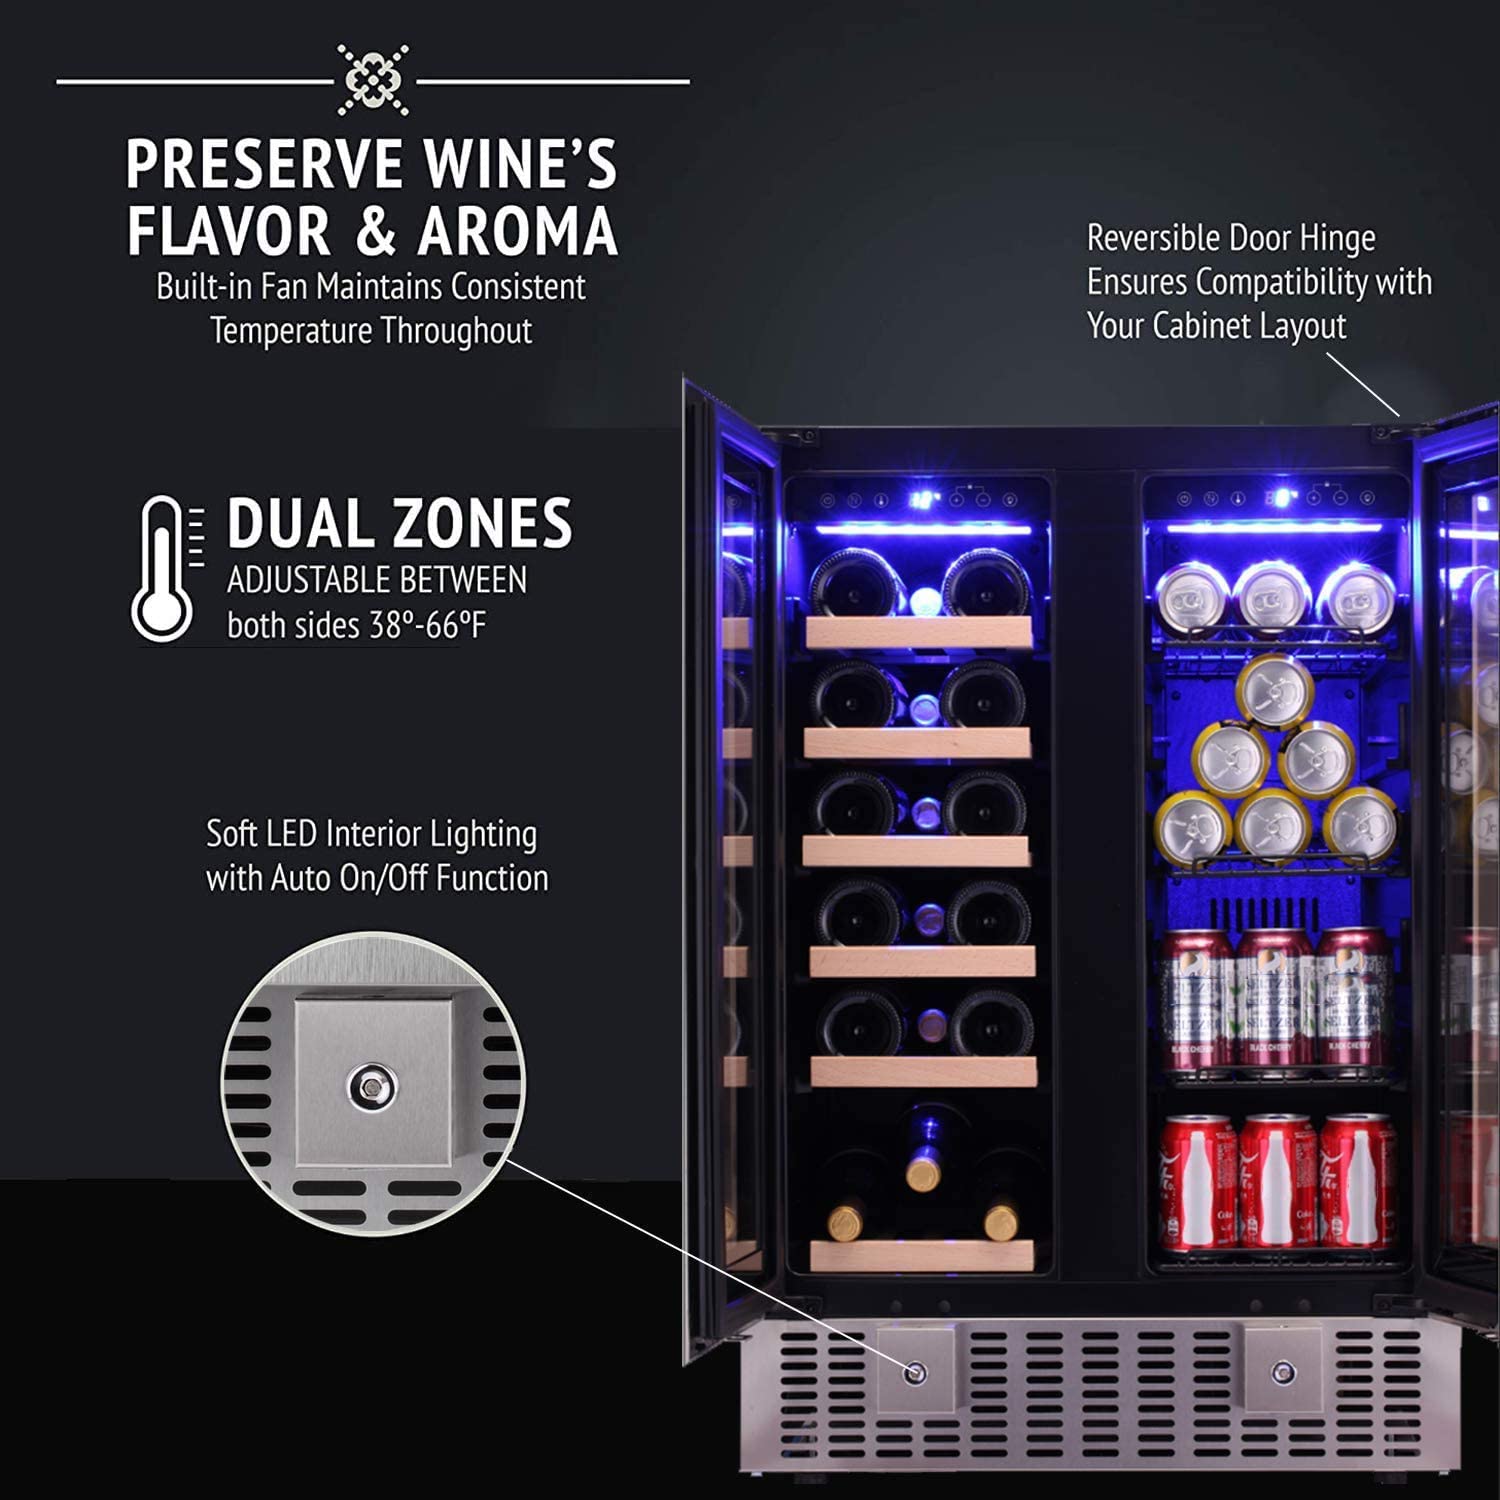 10 Best Dual Zone Wine Cooler Reviews: French Door Wine Cooler Fridge/ Cellars Under $300, $500, $1000 All In One Cooling Gear Lab: Any Refrigerators Air Conditioners Freezers Ice Makers Coolers Fans Reviewed And Compared.